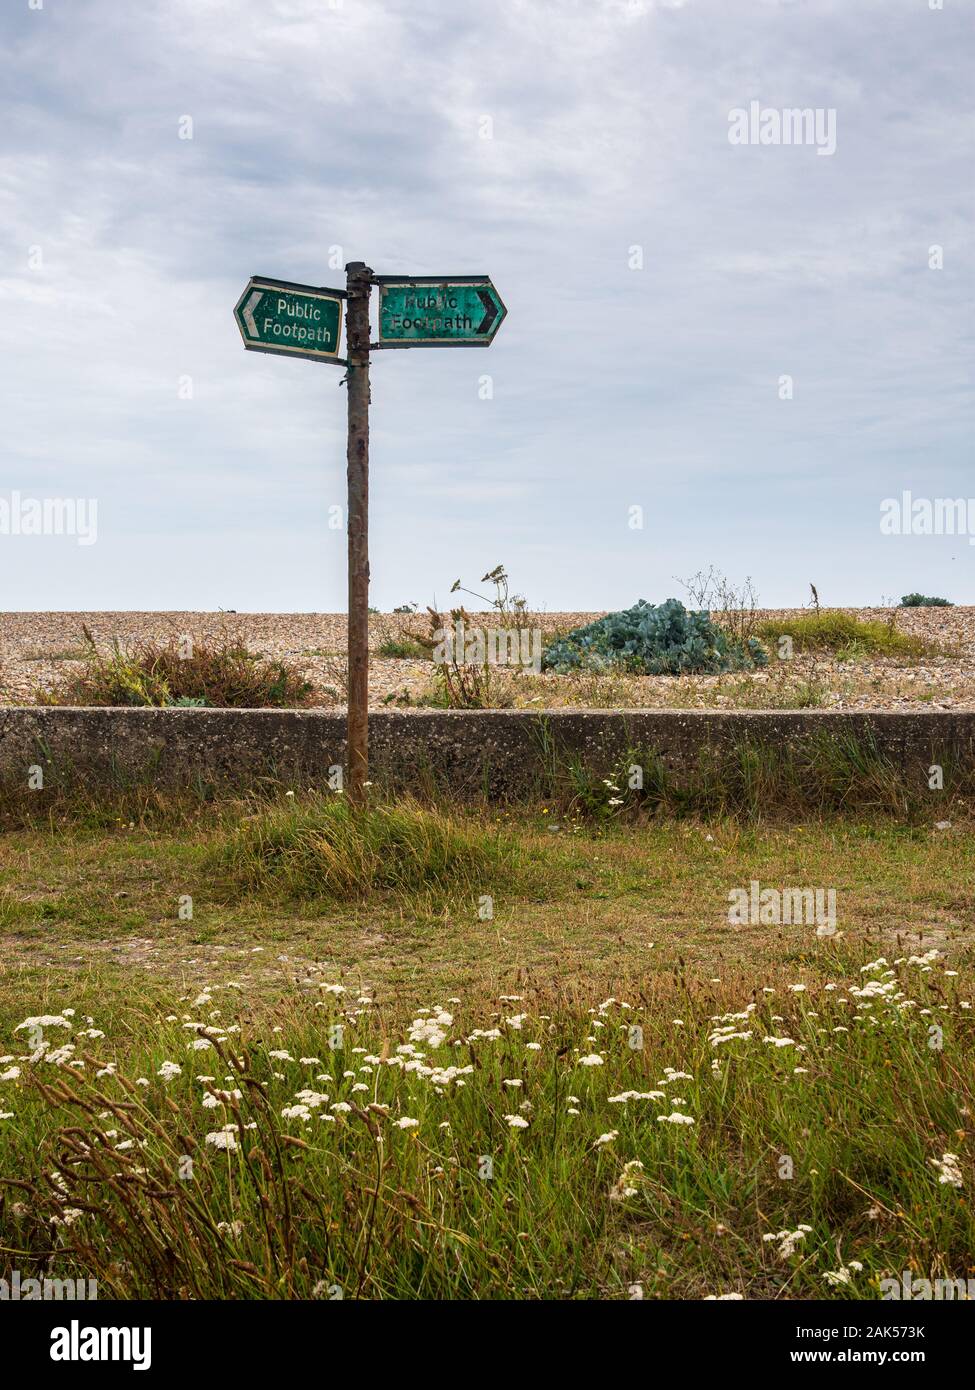 A rusty public footpath sign stands exposed on Climping Beach at Atherington near Littlehampton in Sussex. Stock Photo